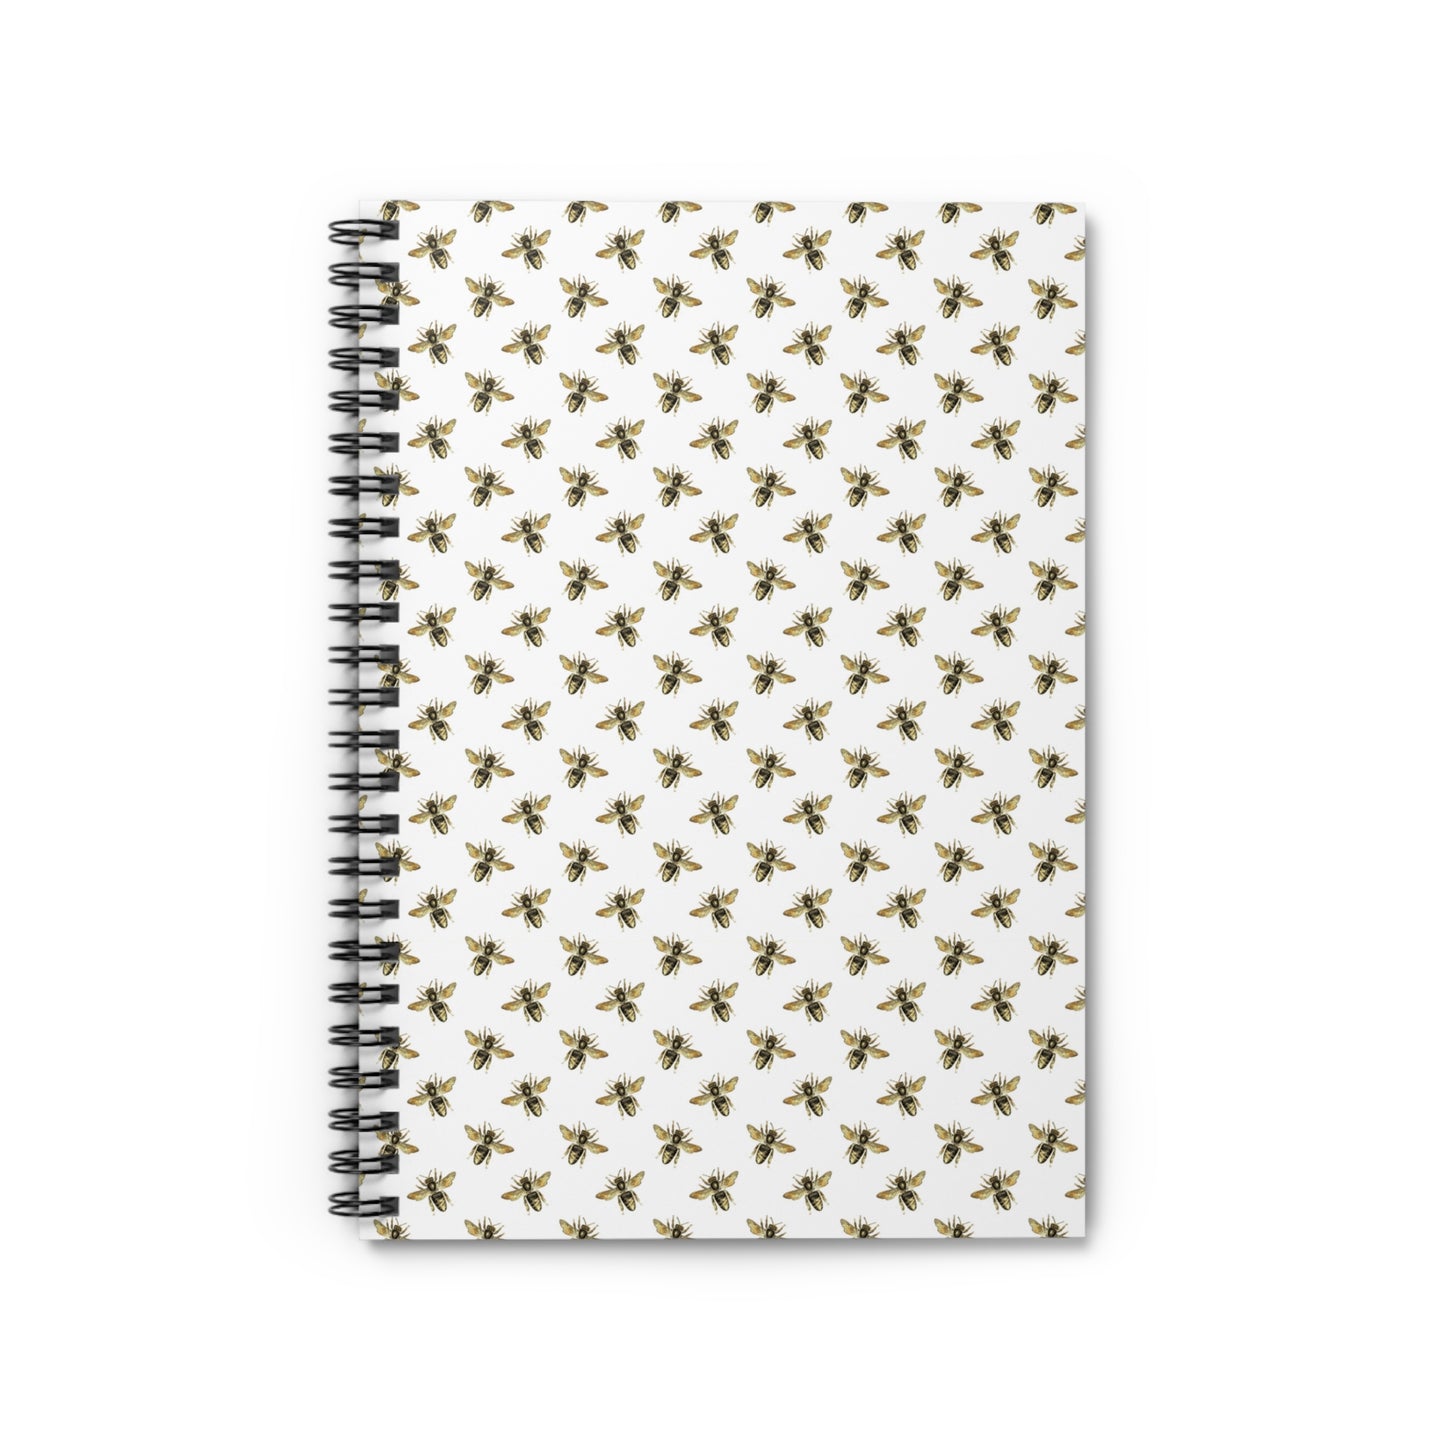 Limited Edition Bumble Bee Order Books - 6 Designs